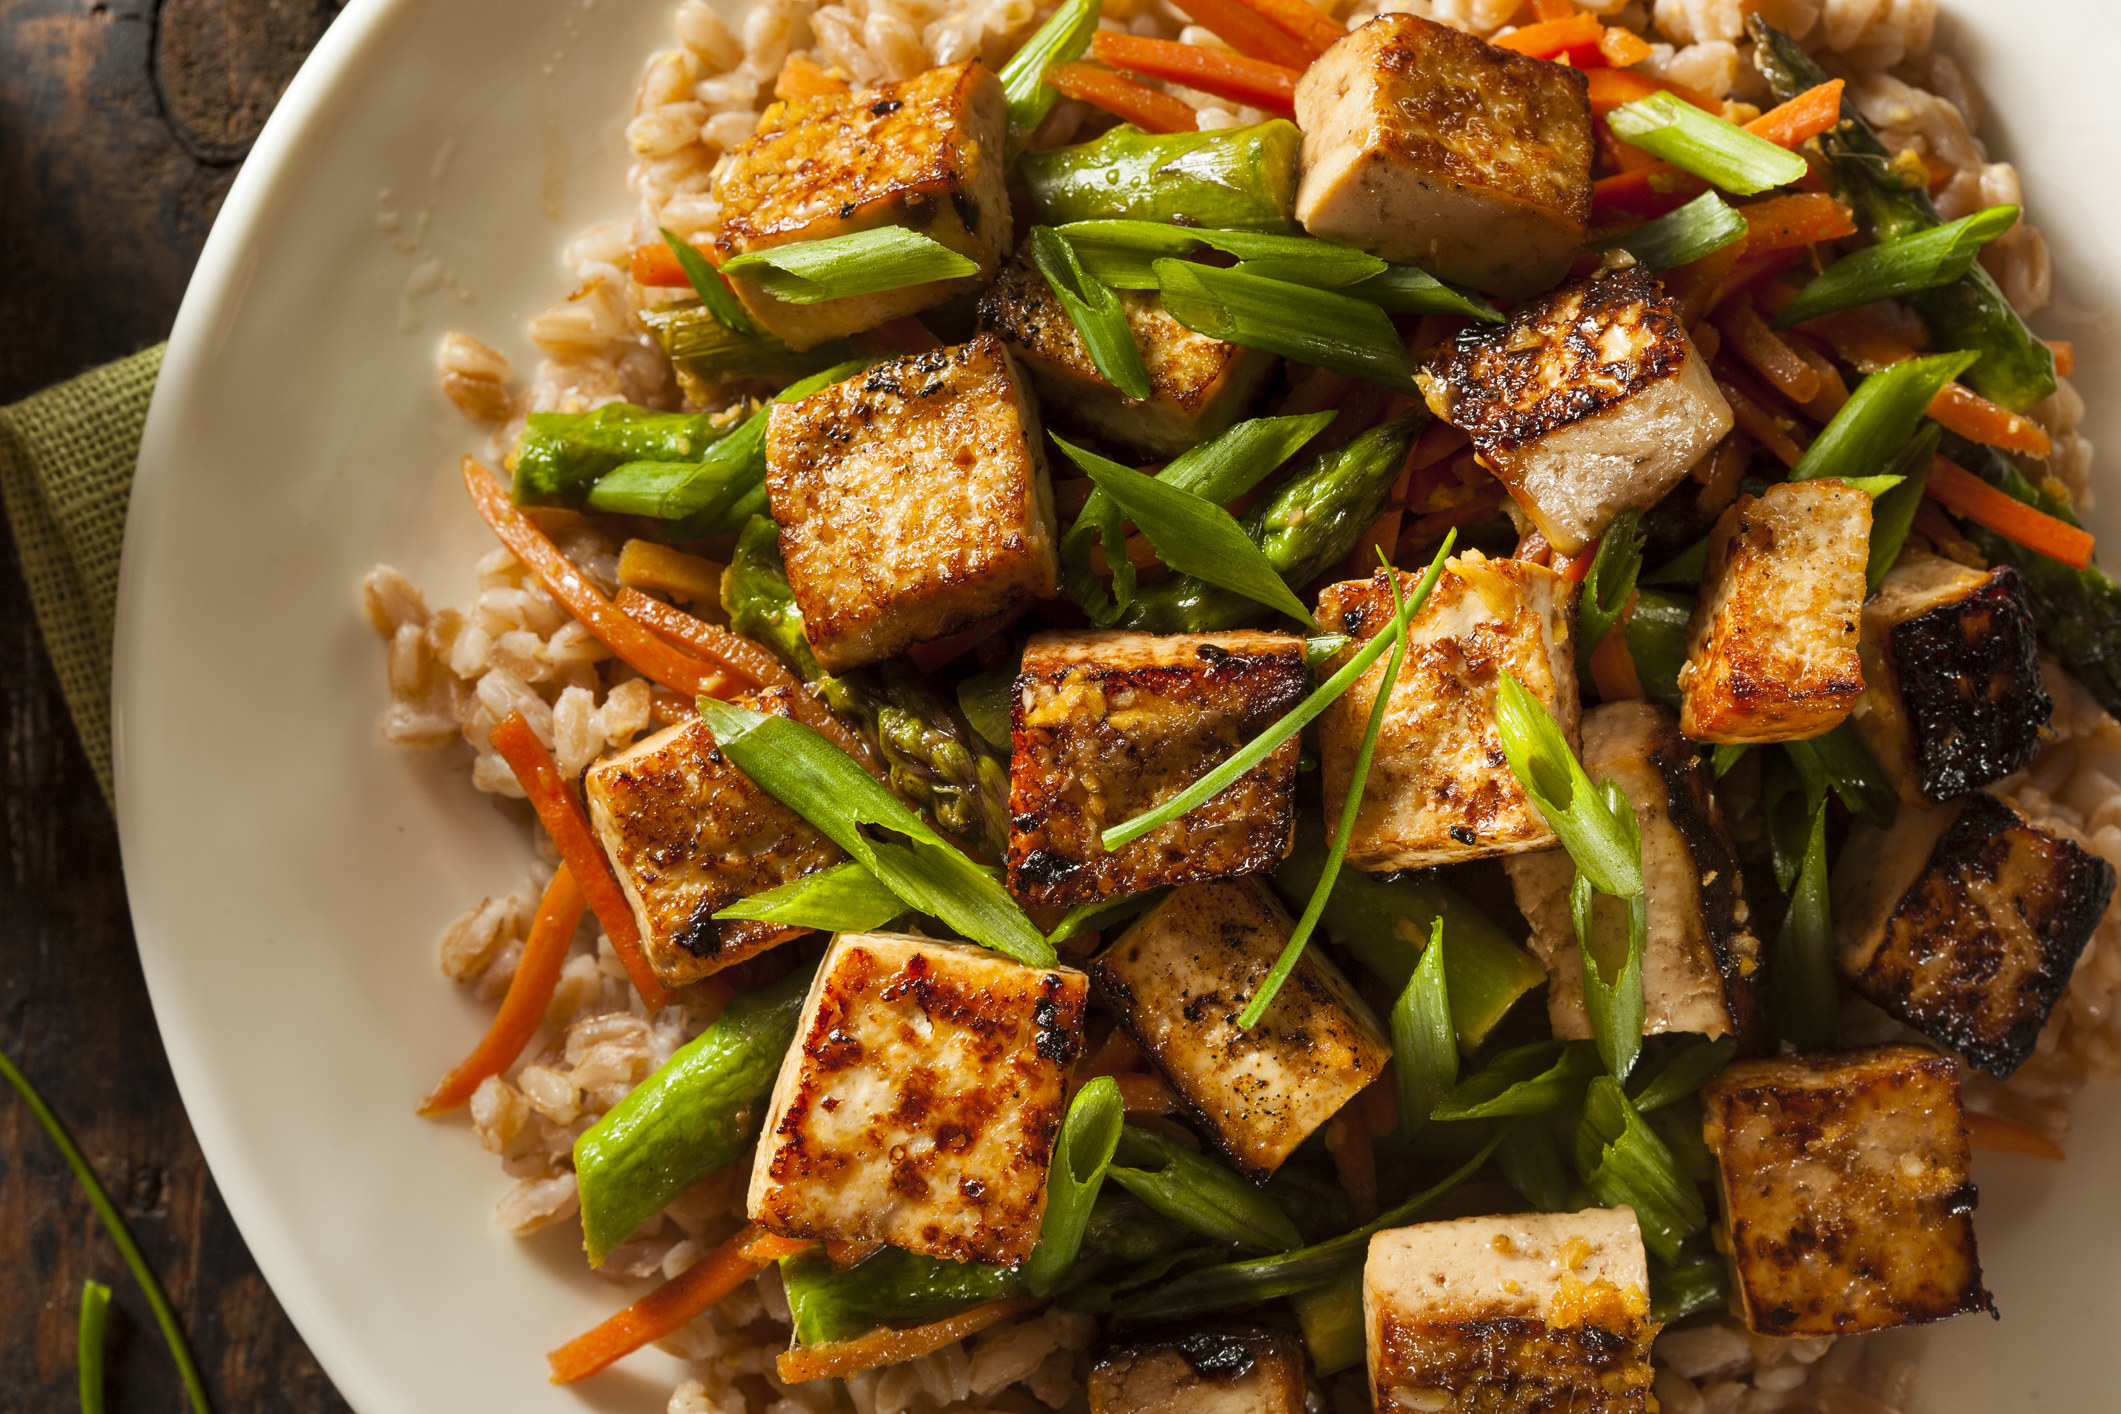 Tofu stir fry with vegetables and rice.